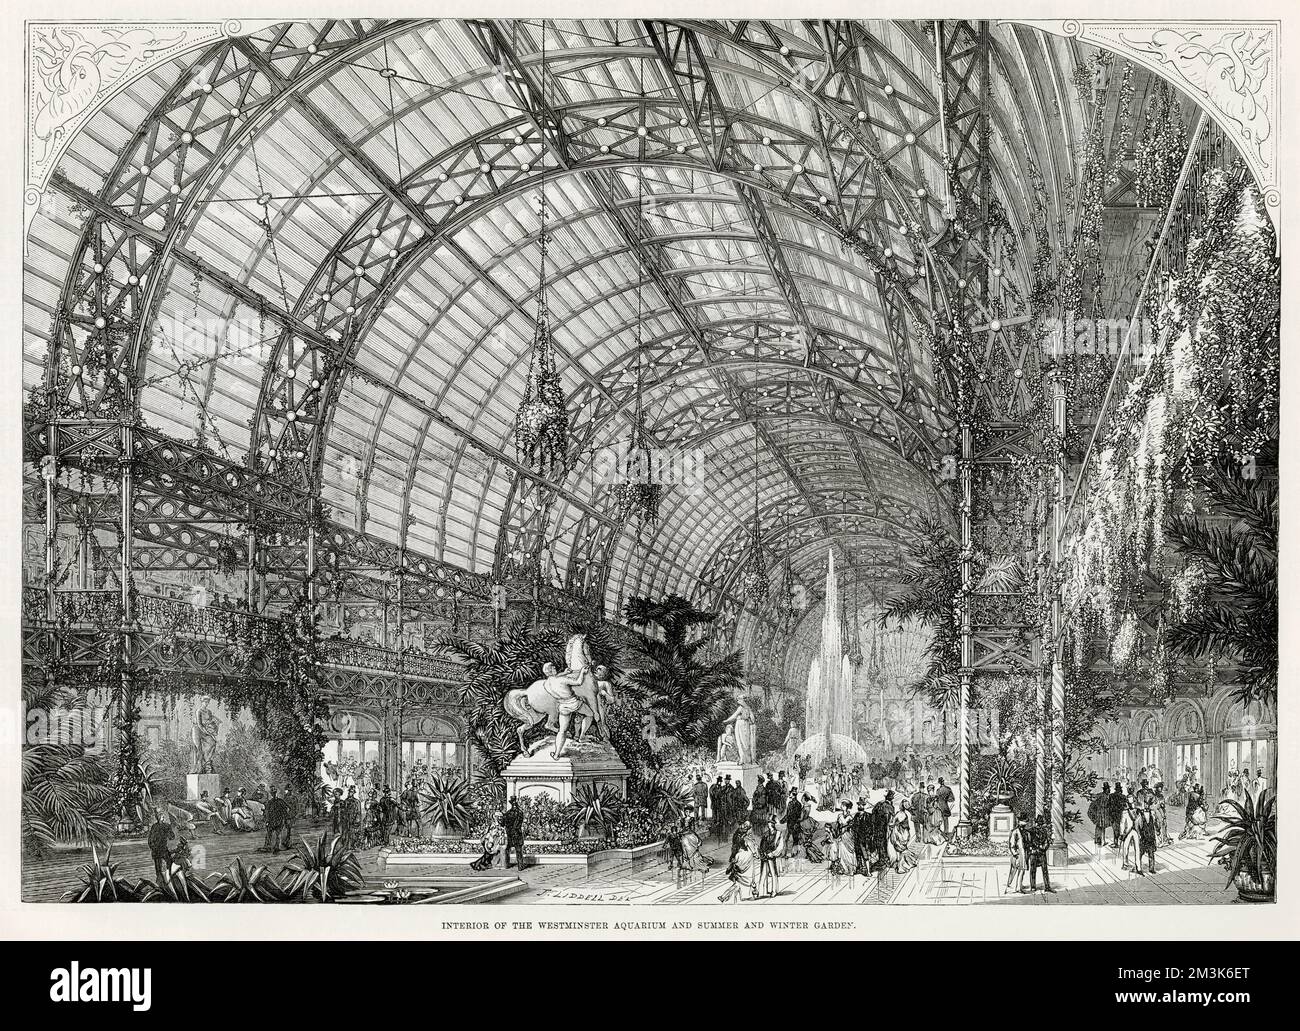 Interior of the Royal Aquarium and Winter Garden, Westminster, London, opening on the 22nd January 1876. The building had a iron structure and glass roof, decorated with palm trees, fountains, pieces of original sculpture     Date: 1875 Stock Photo